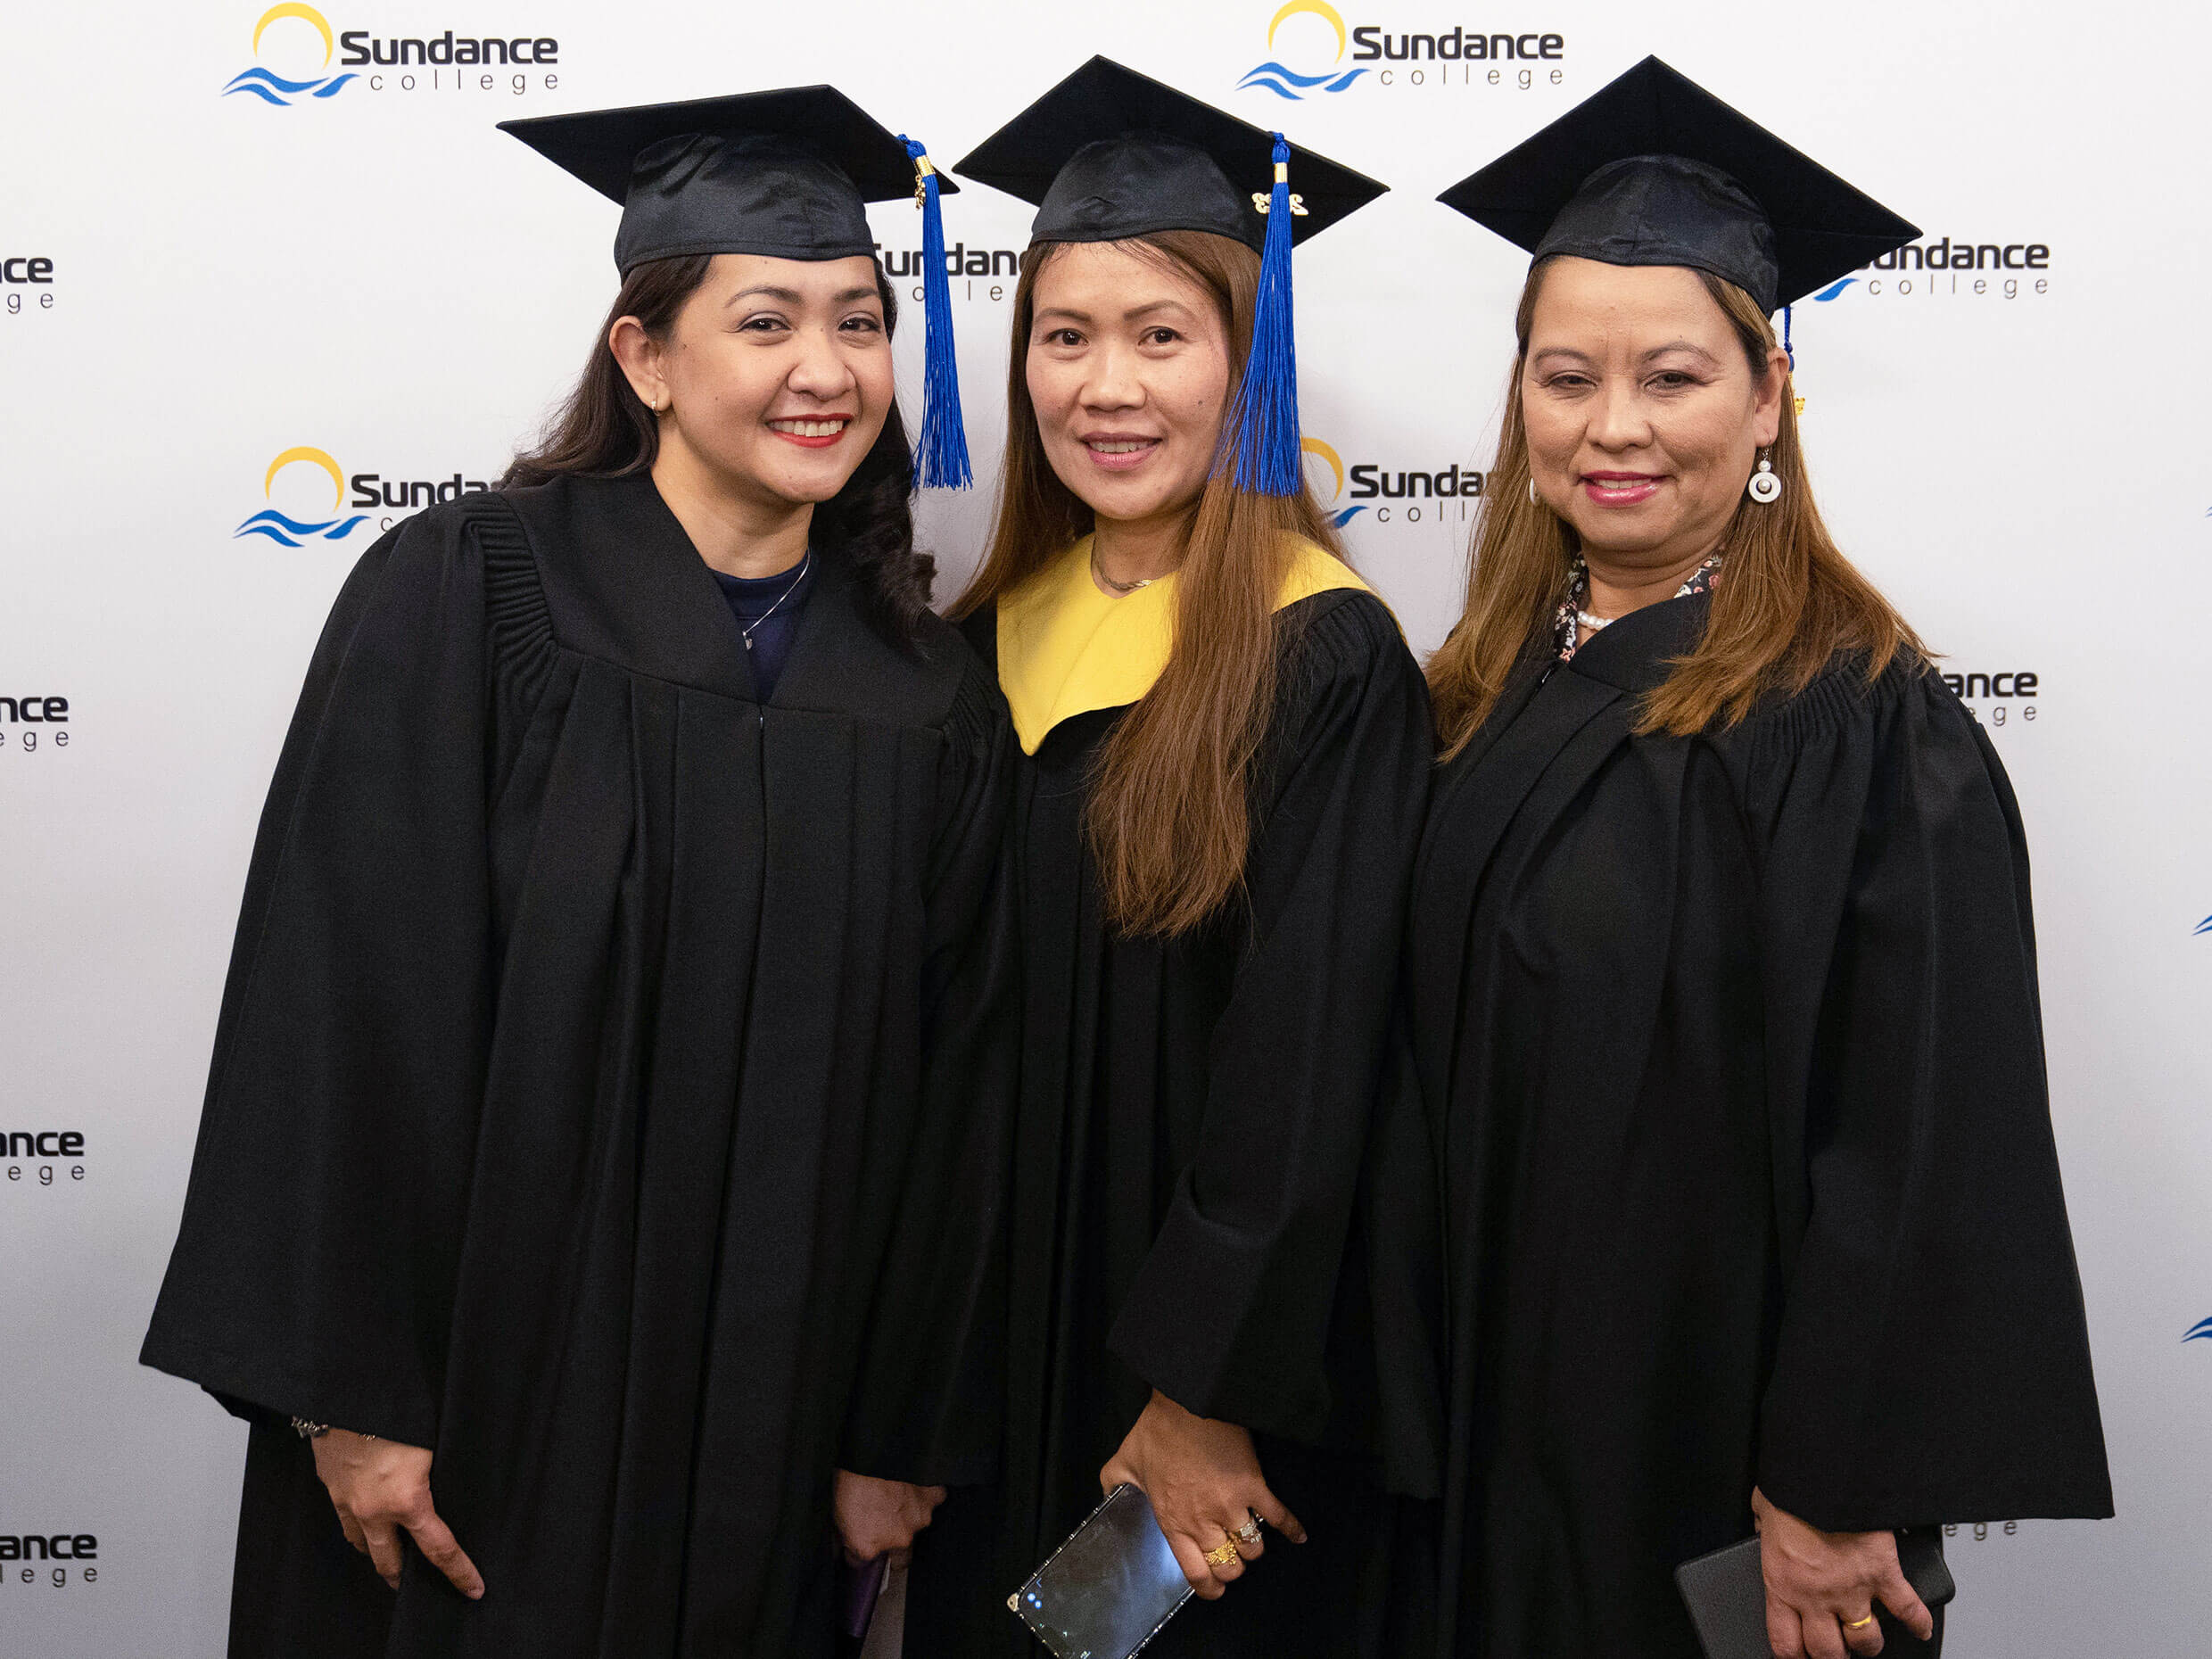 Lalaine P. and fellow happy graduates, in their graduation caps and gowns, posing for a commemorative photograph